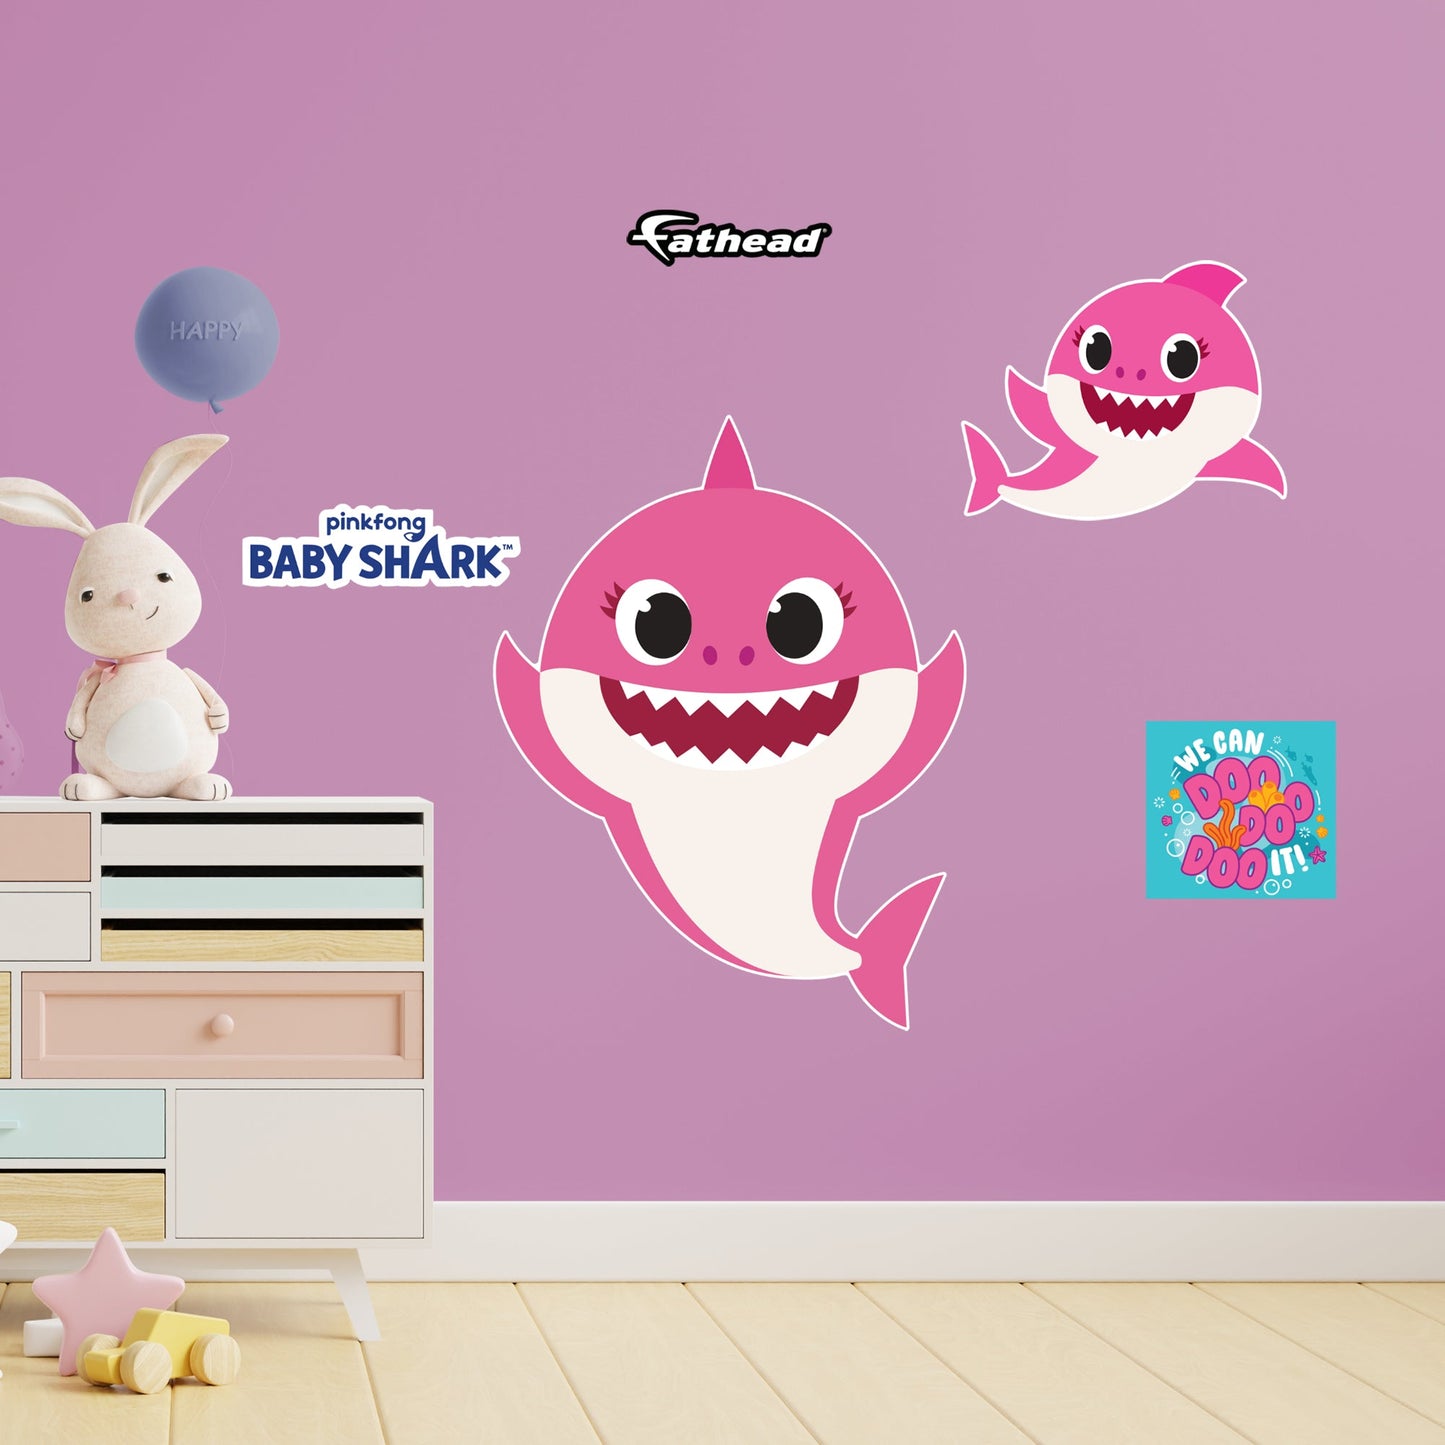 Baby Shark: Mommy Shark RealBig - Officially Licensed Nickelodeon Removable Adhesive Decal